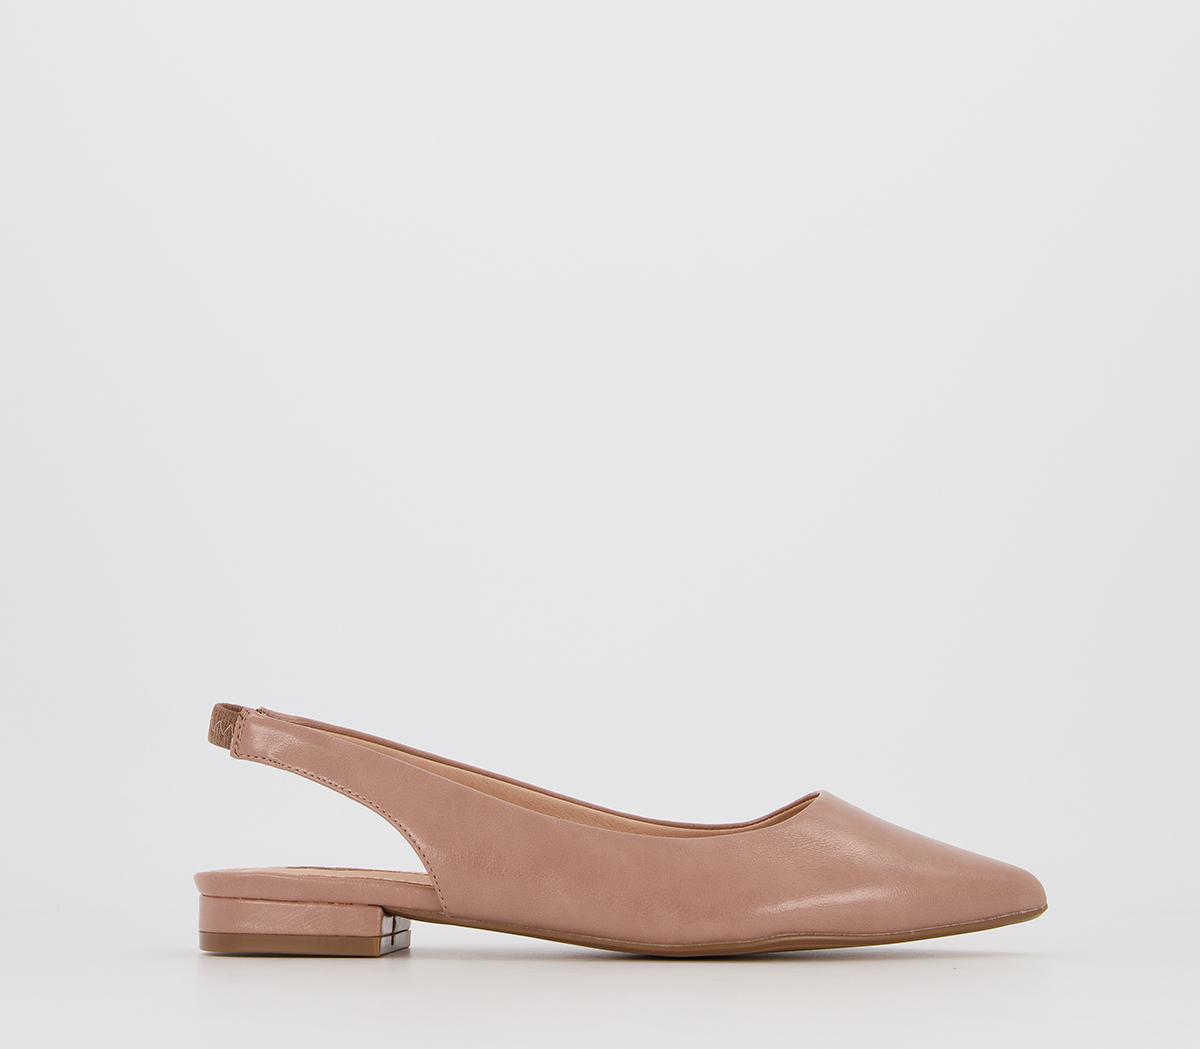 OFFICEFlavour Pointed Slingback FlatsBeige